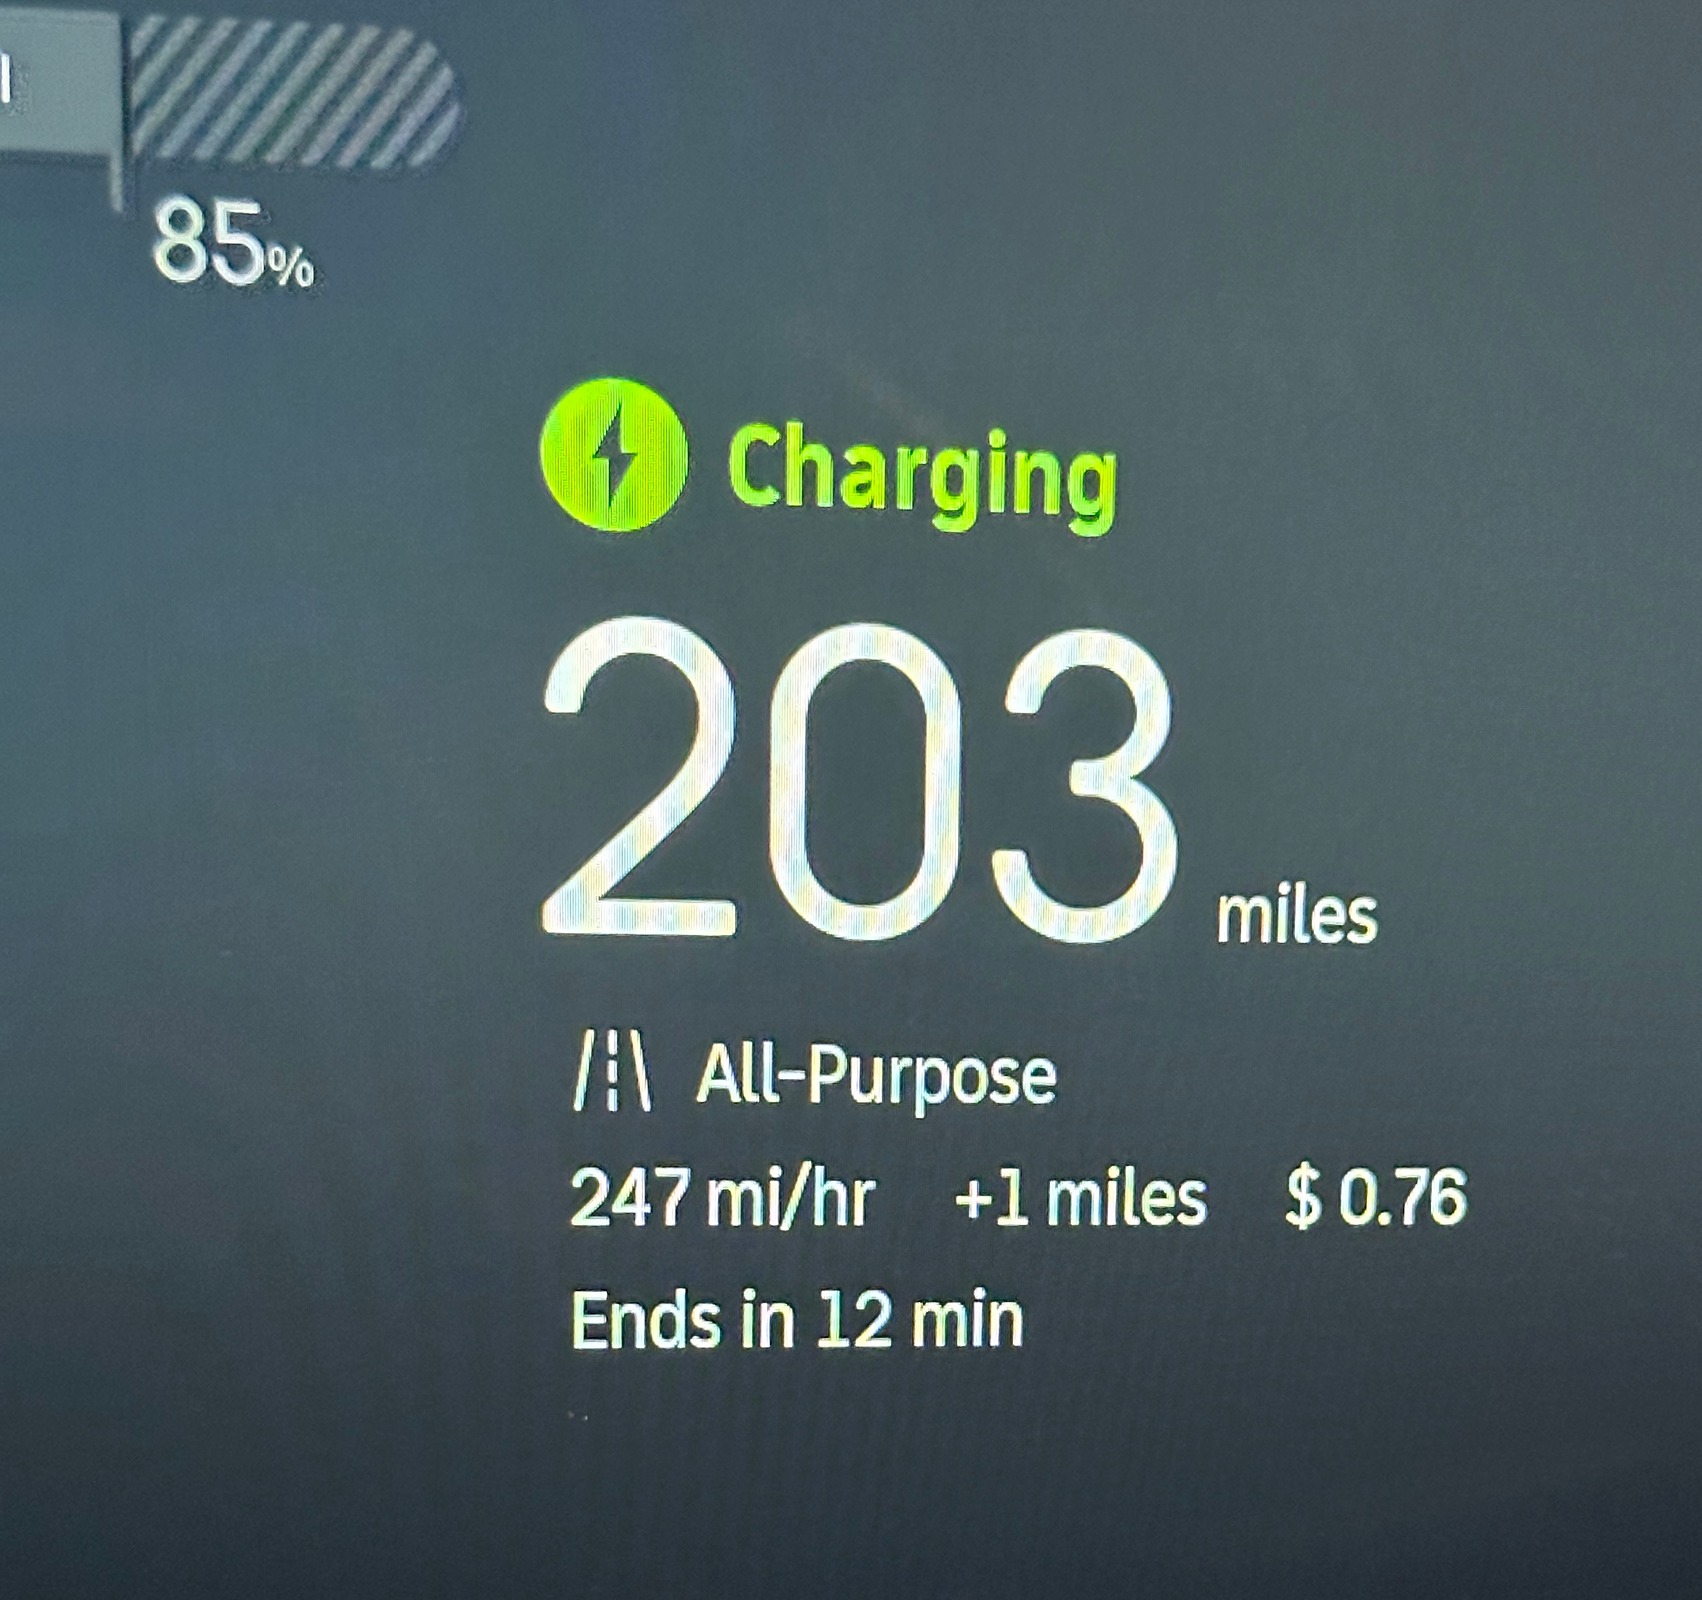 Rivian R1T R1S Video: Tesla supercharging pricing / cost shows on both R1 screens while charging IMG_6556